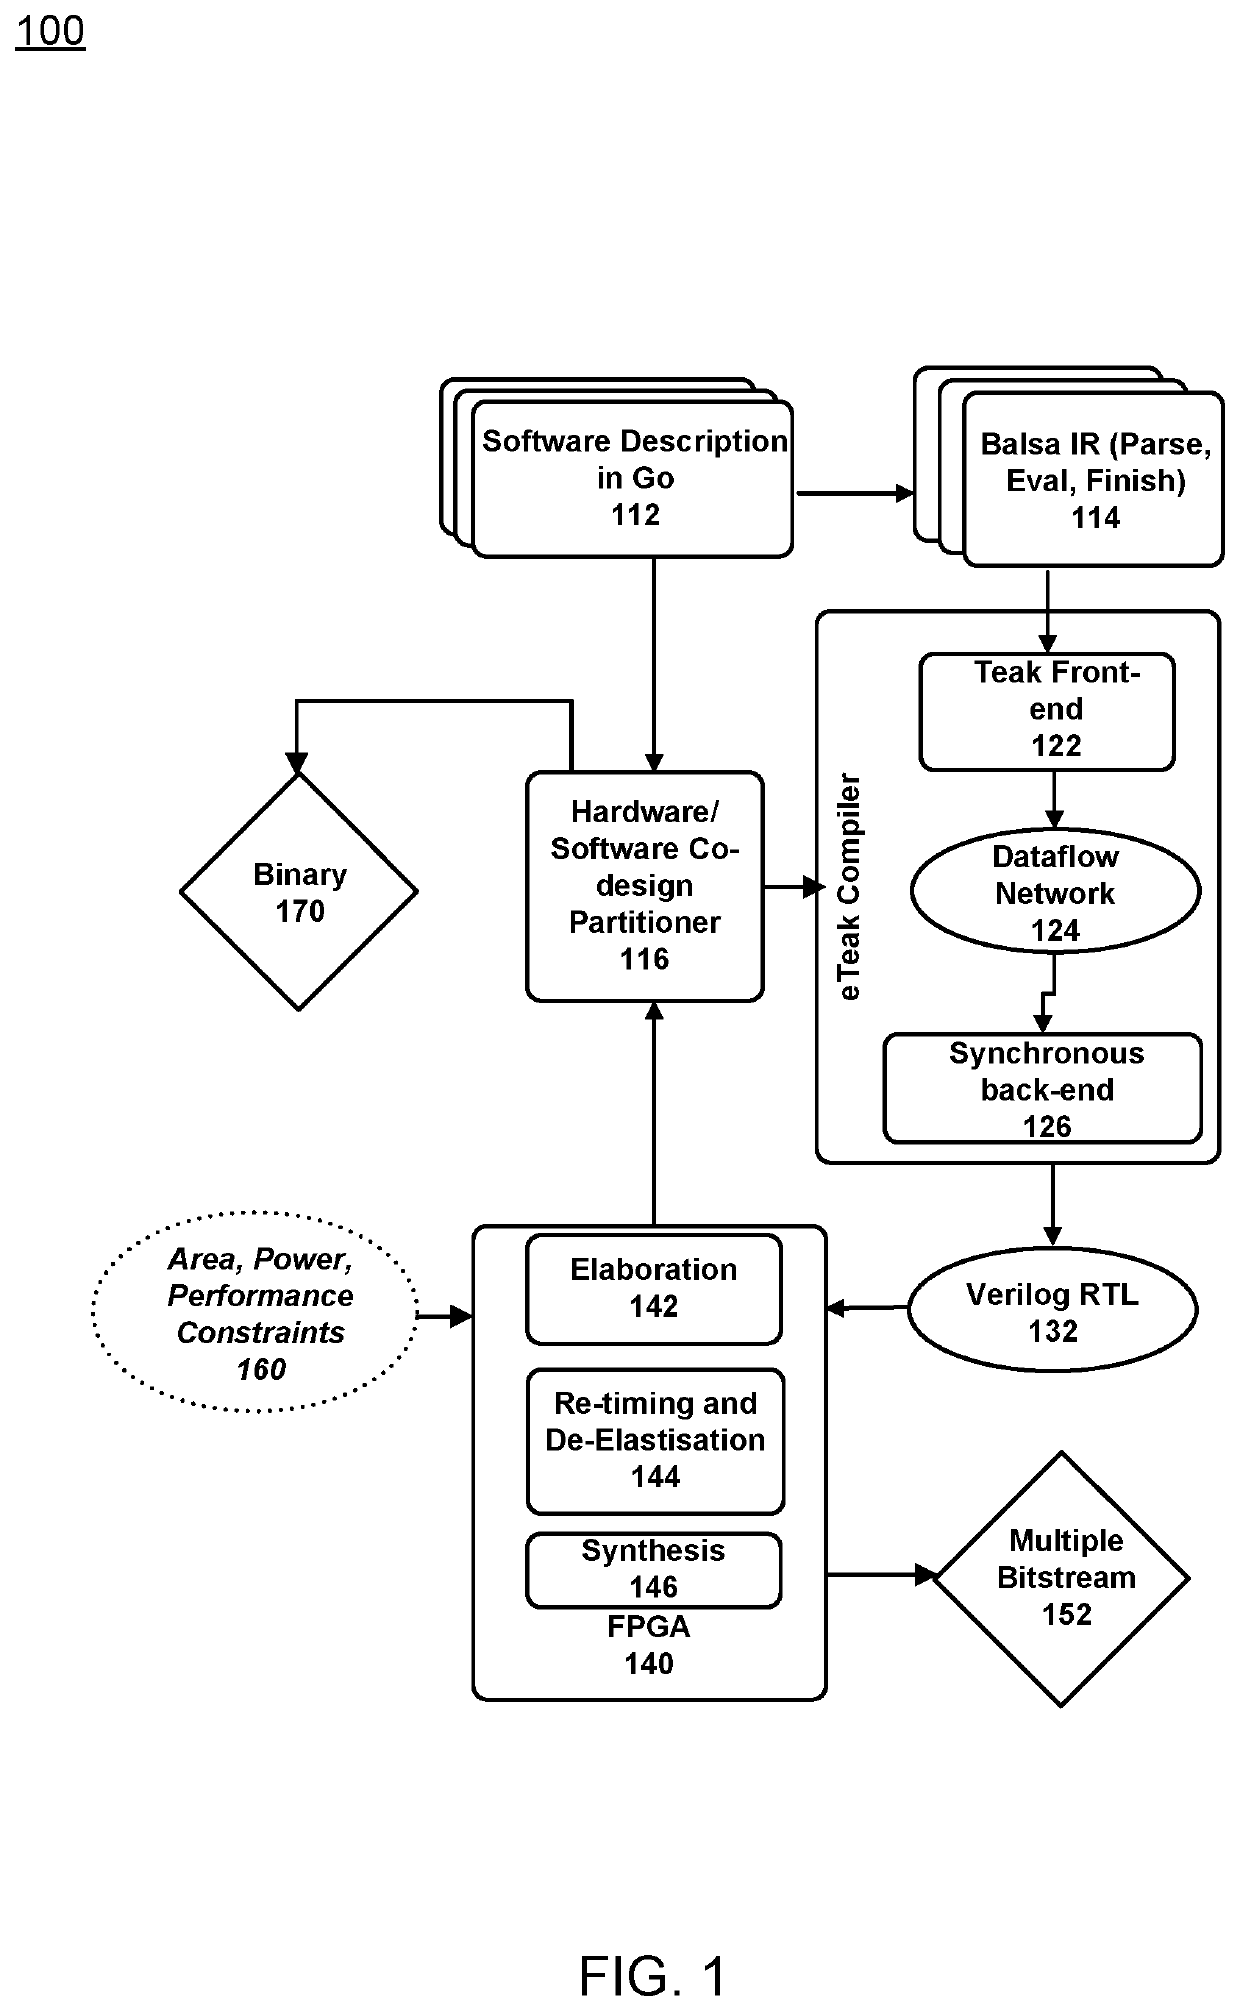 Synthesis Path For Transforming Concurrent Programs Into Hardware Deployable on FPGA-Based Cloud Infrastructures